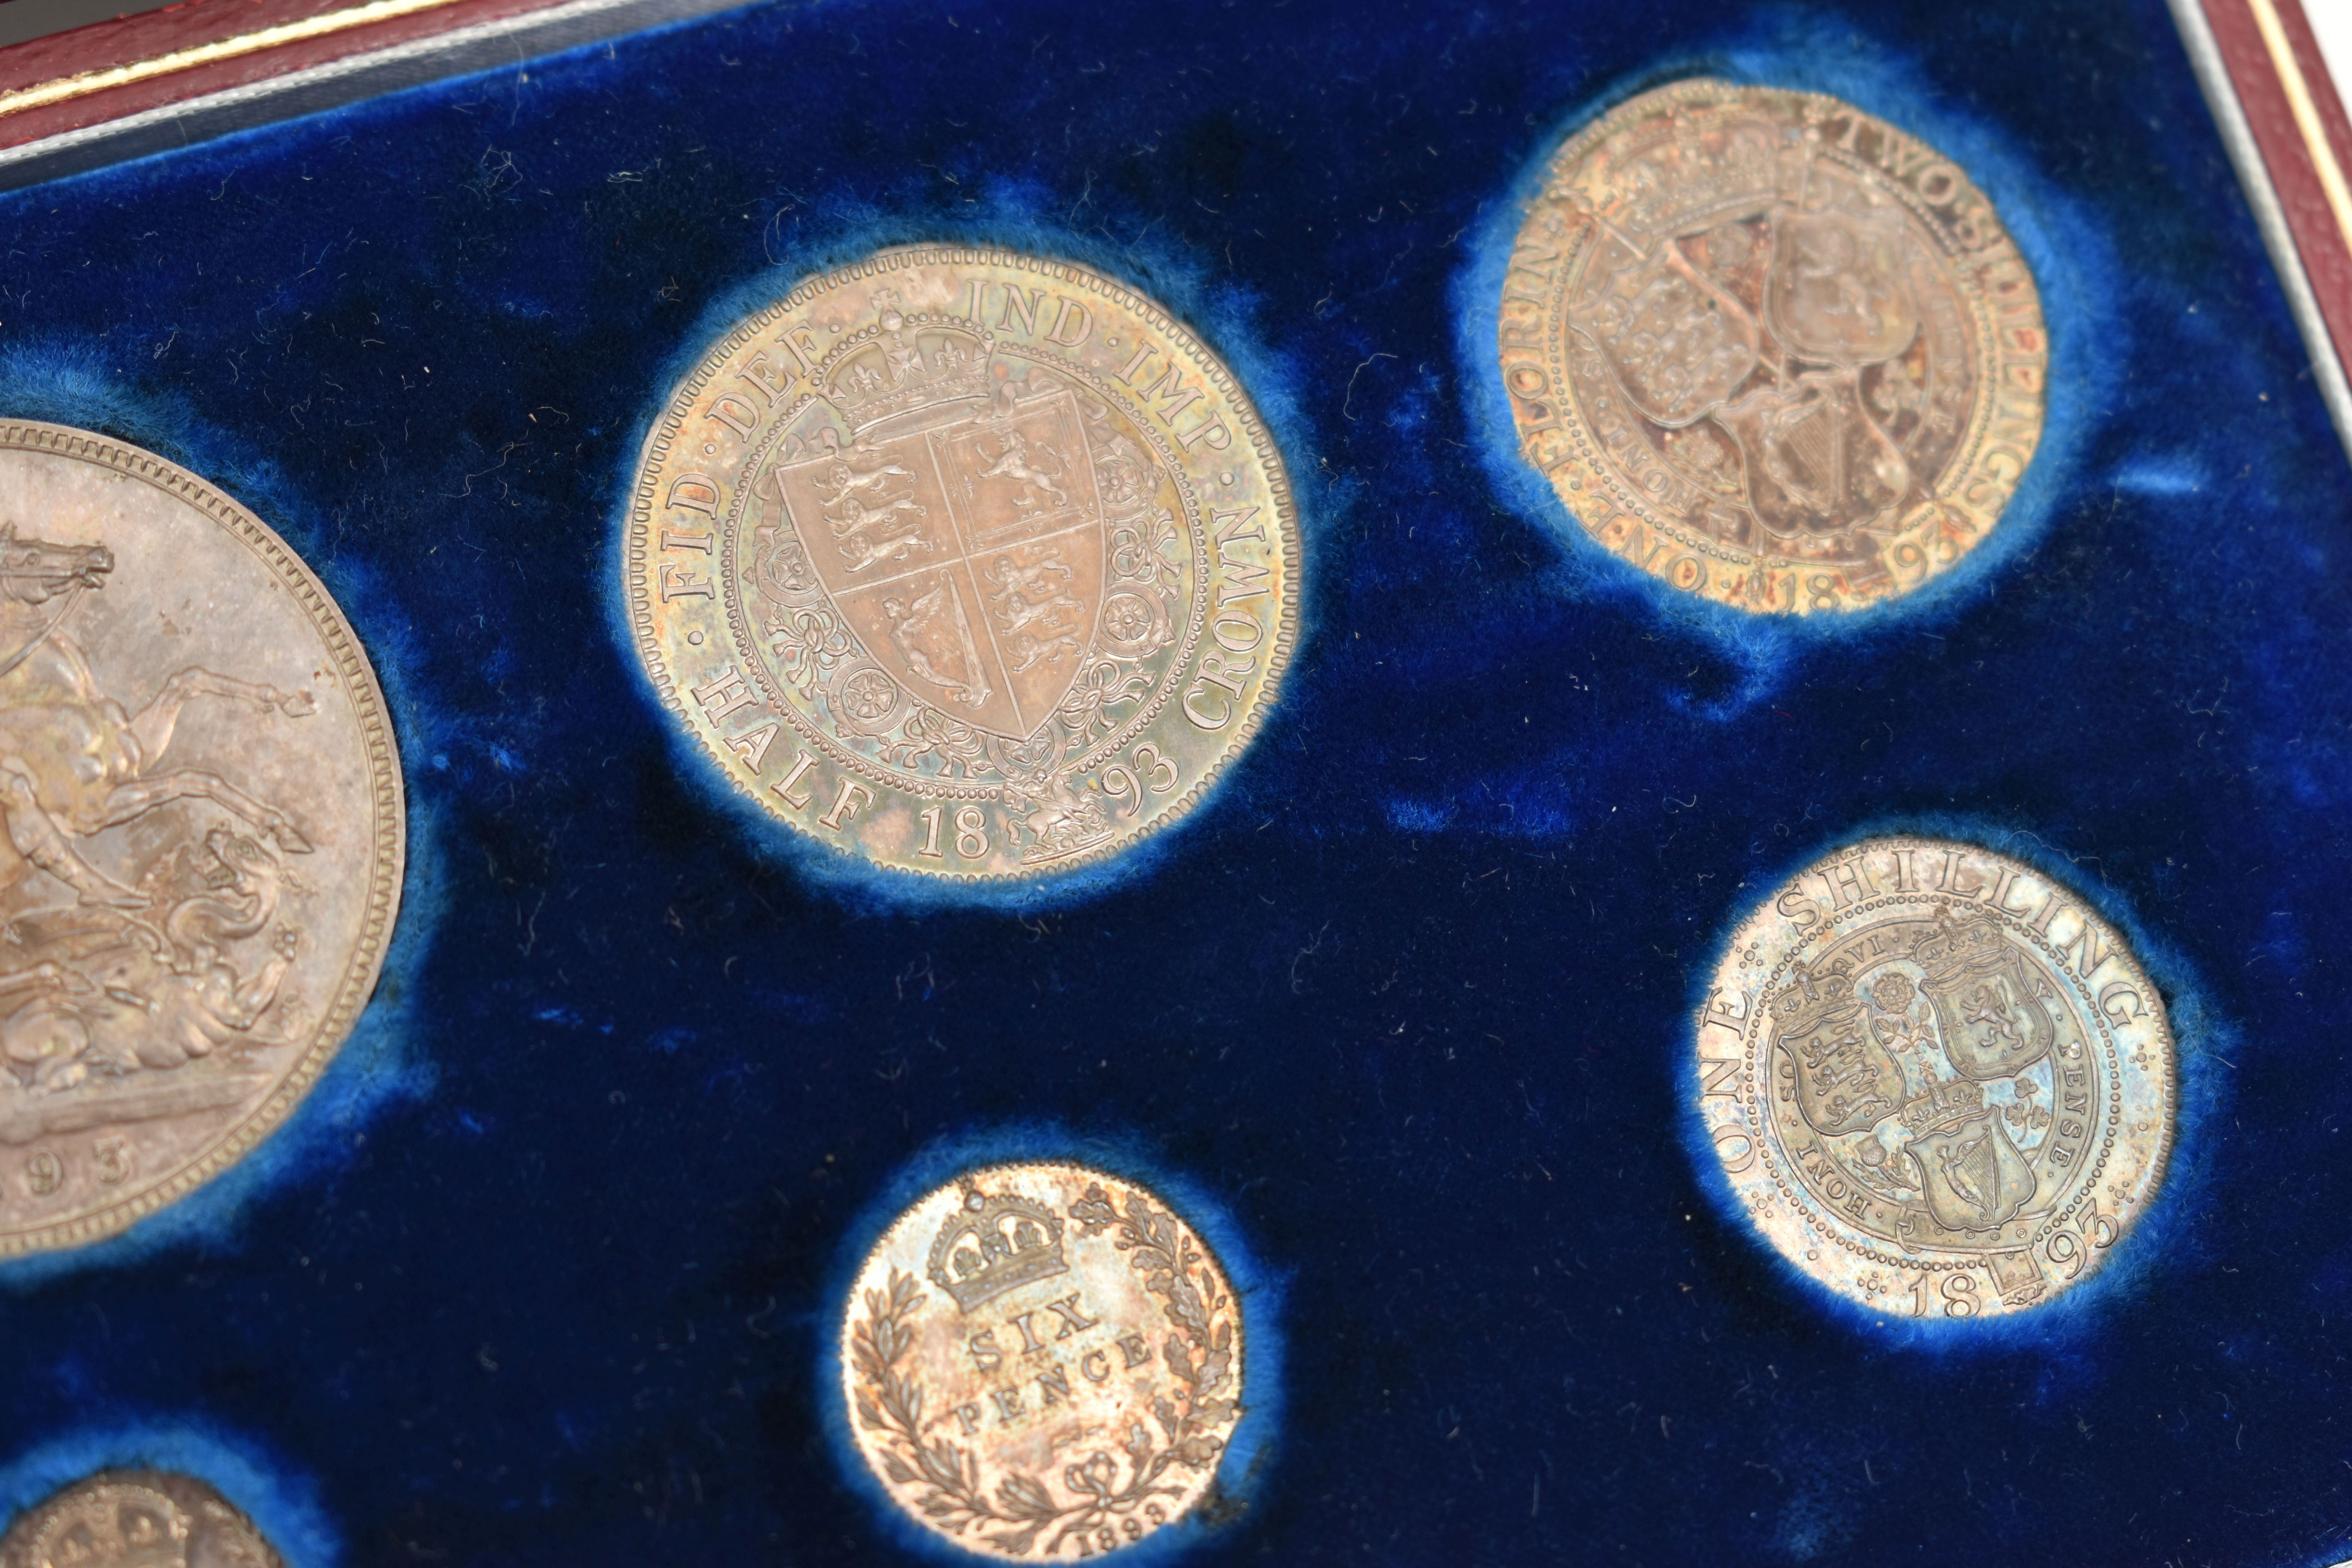 AN ENGLISH CASED 1893 PROOF SET OF COINS, comprising of Crown LV1, Half-crown, Florin, Shilling, - Image 4 of 5